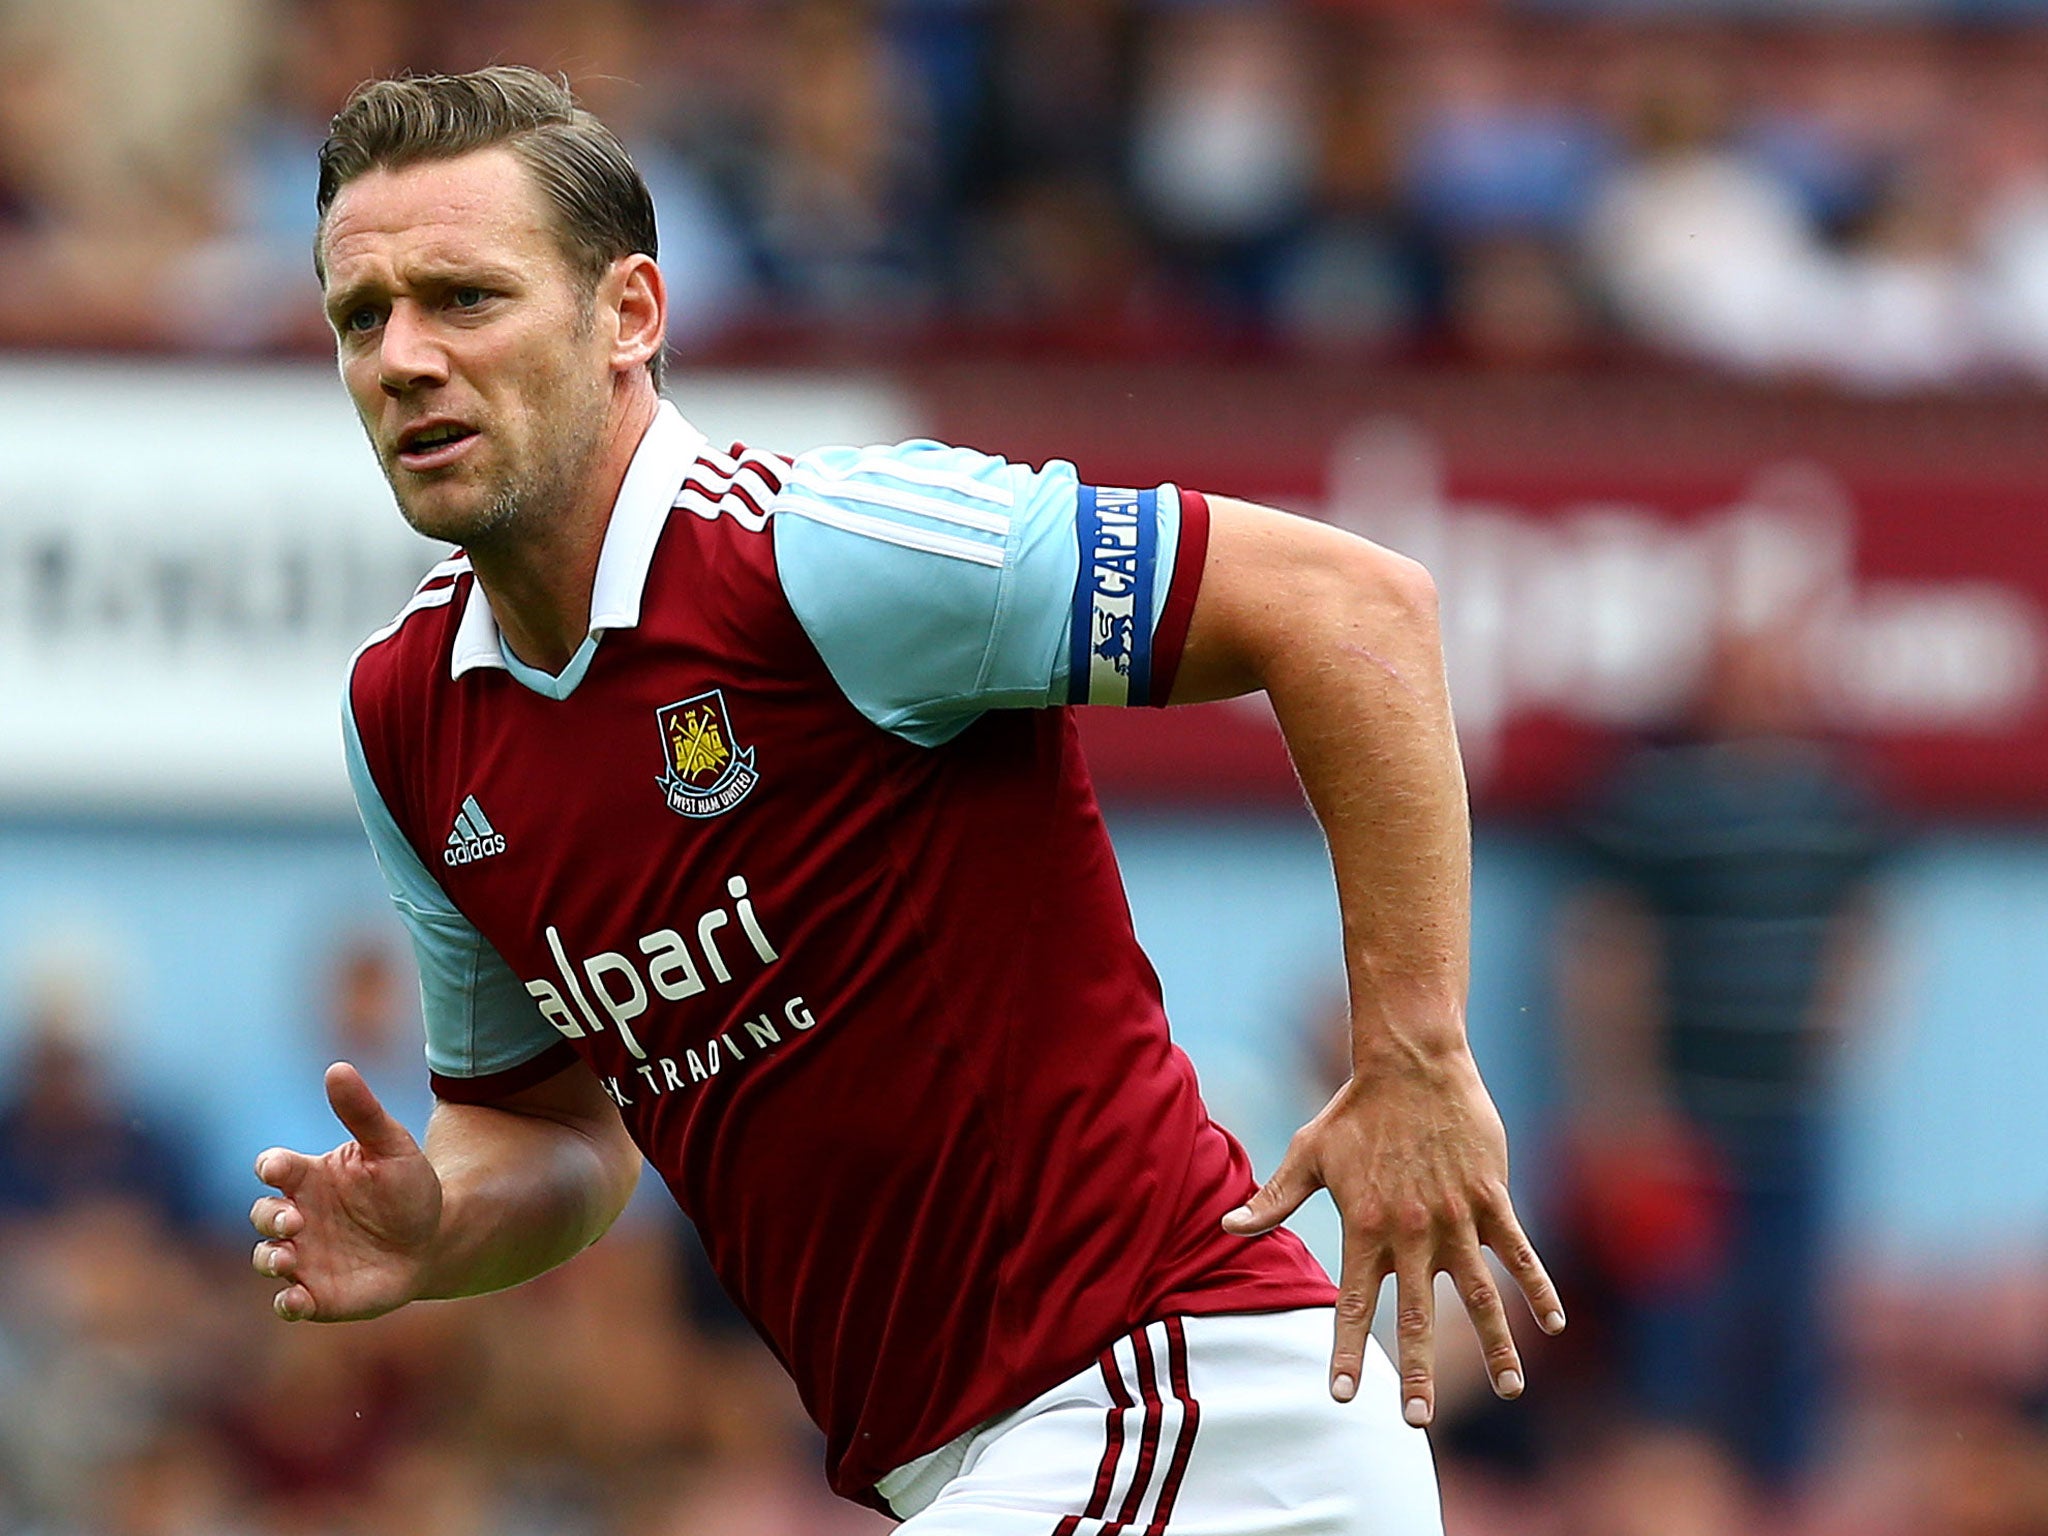 Cardiff take on West Ham, captained by Kevin Nolan, tomorrow